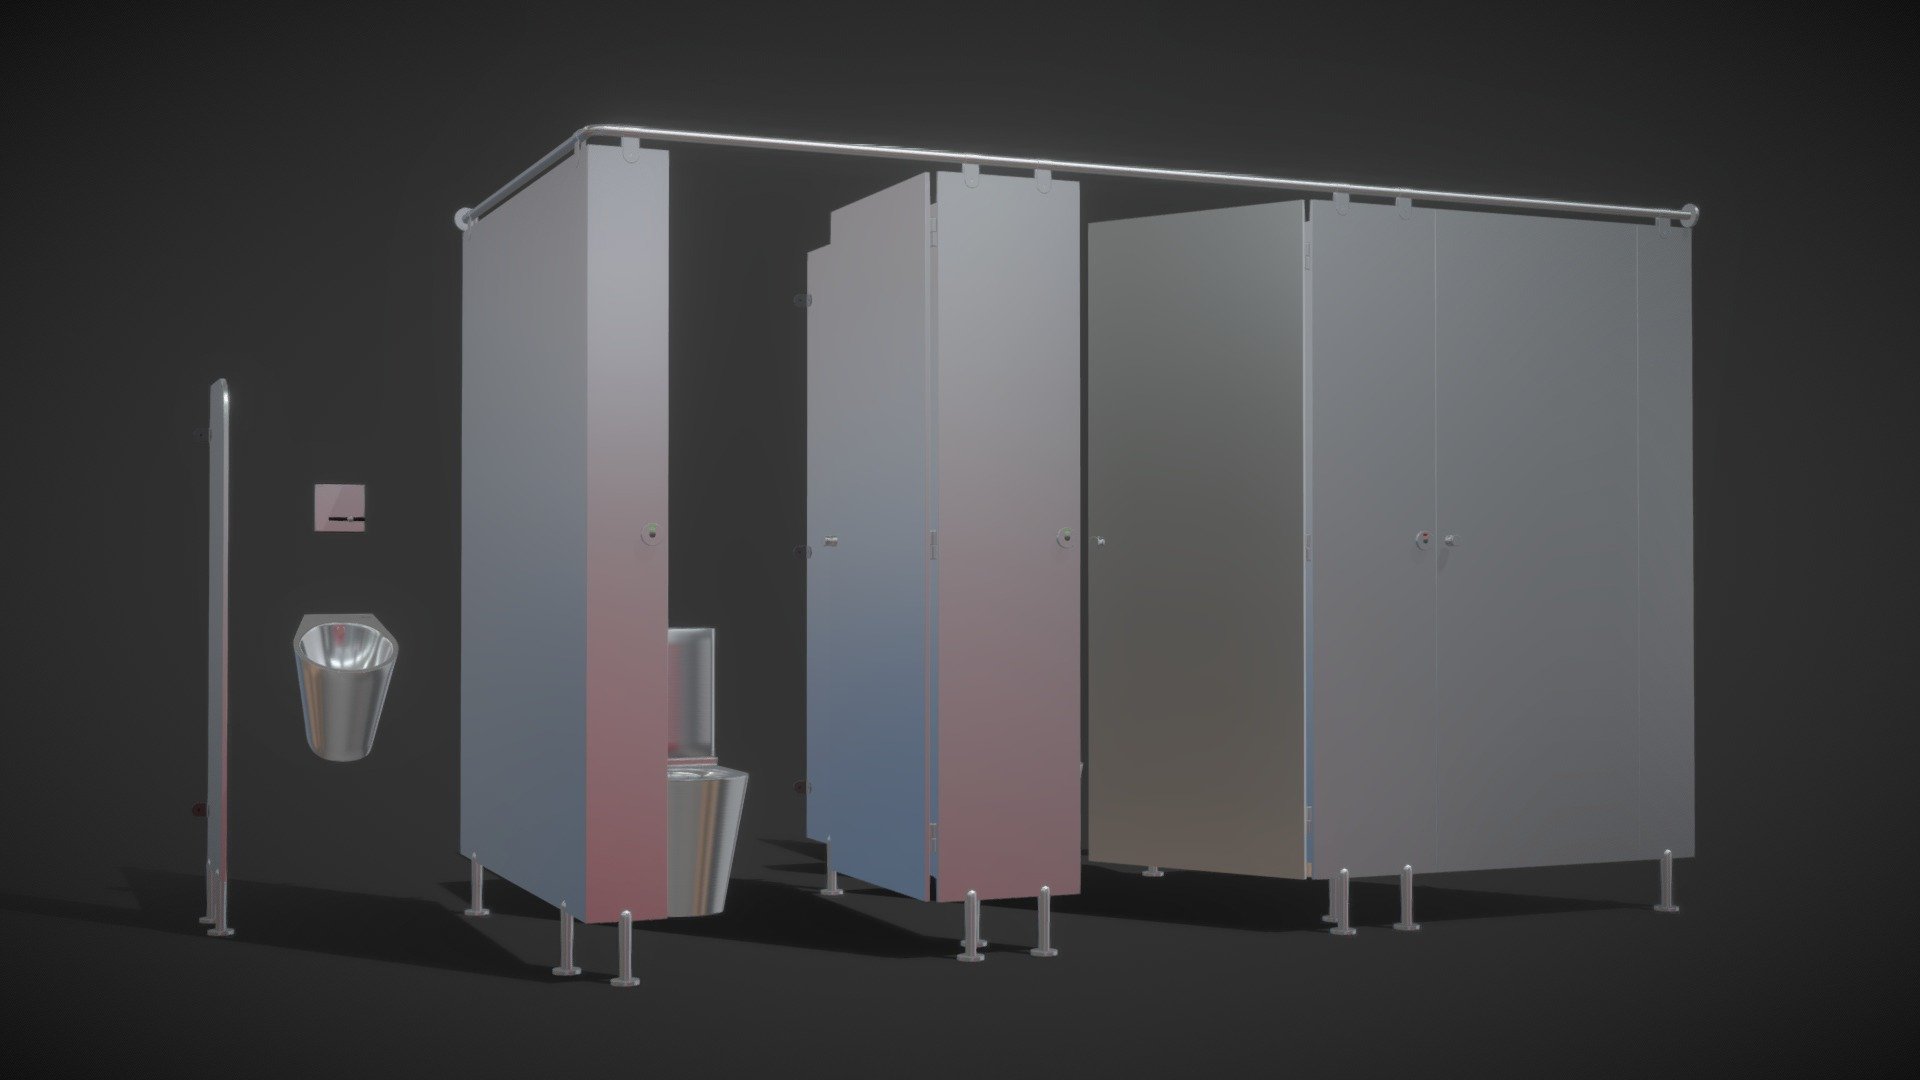 Realistic (copy) 3d model of Sanitary partitions for public toilets FunderMax 2.

Topology of geometry:
- forms and proportions of The 3D model most similar to the real object
- the geometry of the model was created very neatly
- there are no many-sided polygons
- detailed enough for close-up renders

Materials and Textures:
- 3ds max files included Vray-Shaders
- 3ds max files included Corona-Shaders
- all texture paths are cleared

Organization of scene:
- to all objects and materials names in scene are appropriated
- real world size (system units - mm)
- coordinates of location of the model in space (x0, y0, z0)
- does not contain extraneous or hidden objects (lights, cameras, shapes etc.)

File Formats:
- original file format - 3ds max 2013 + Vray
- 3ds max 2013 Corona
- obj
- 3ds

In the archive:
- DELABIE urinal
- toilet bowl DELABIE
- Set of sanitary partitions FunderMax
- Fittings Normbau
From the components of the set, you can set any number of toilet cubicles in public toilets 3d model